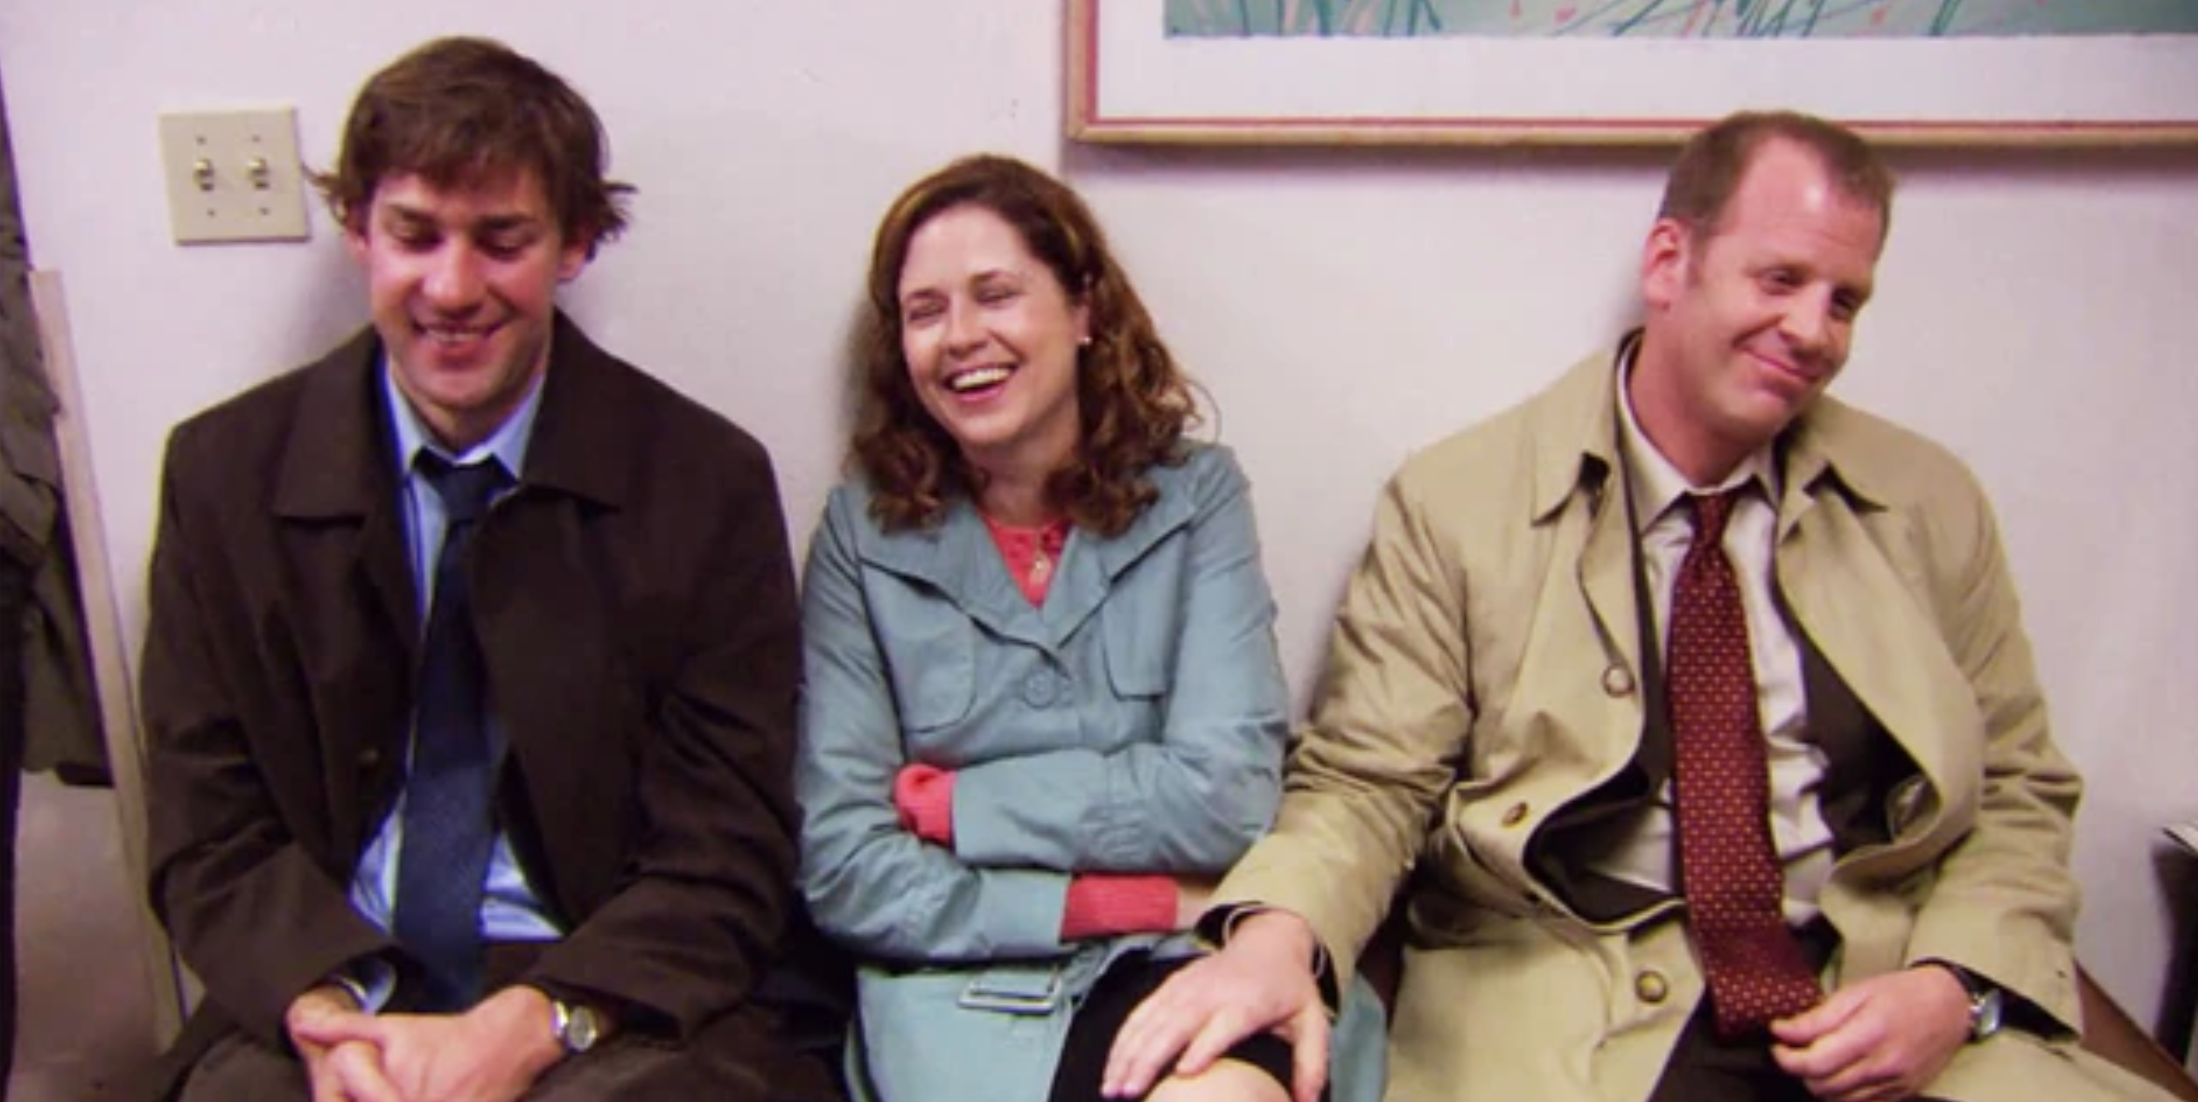 Toby touches Pam's leg as they all sit with Jim in The Office.